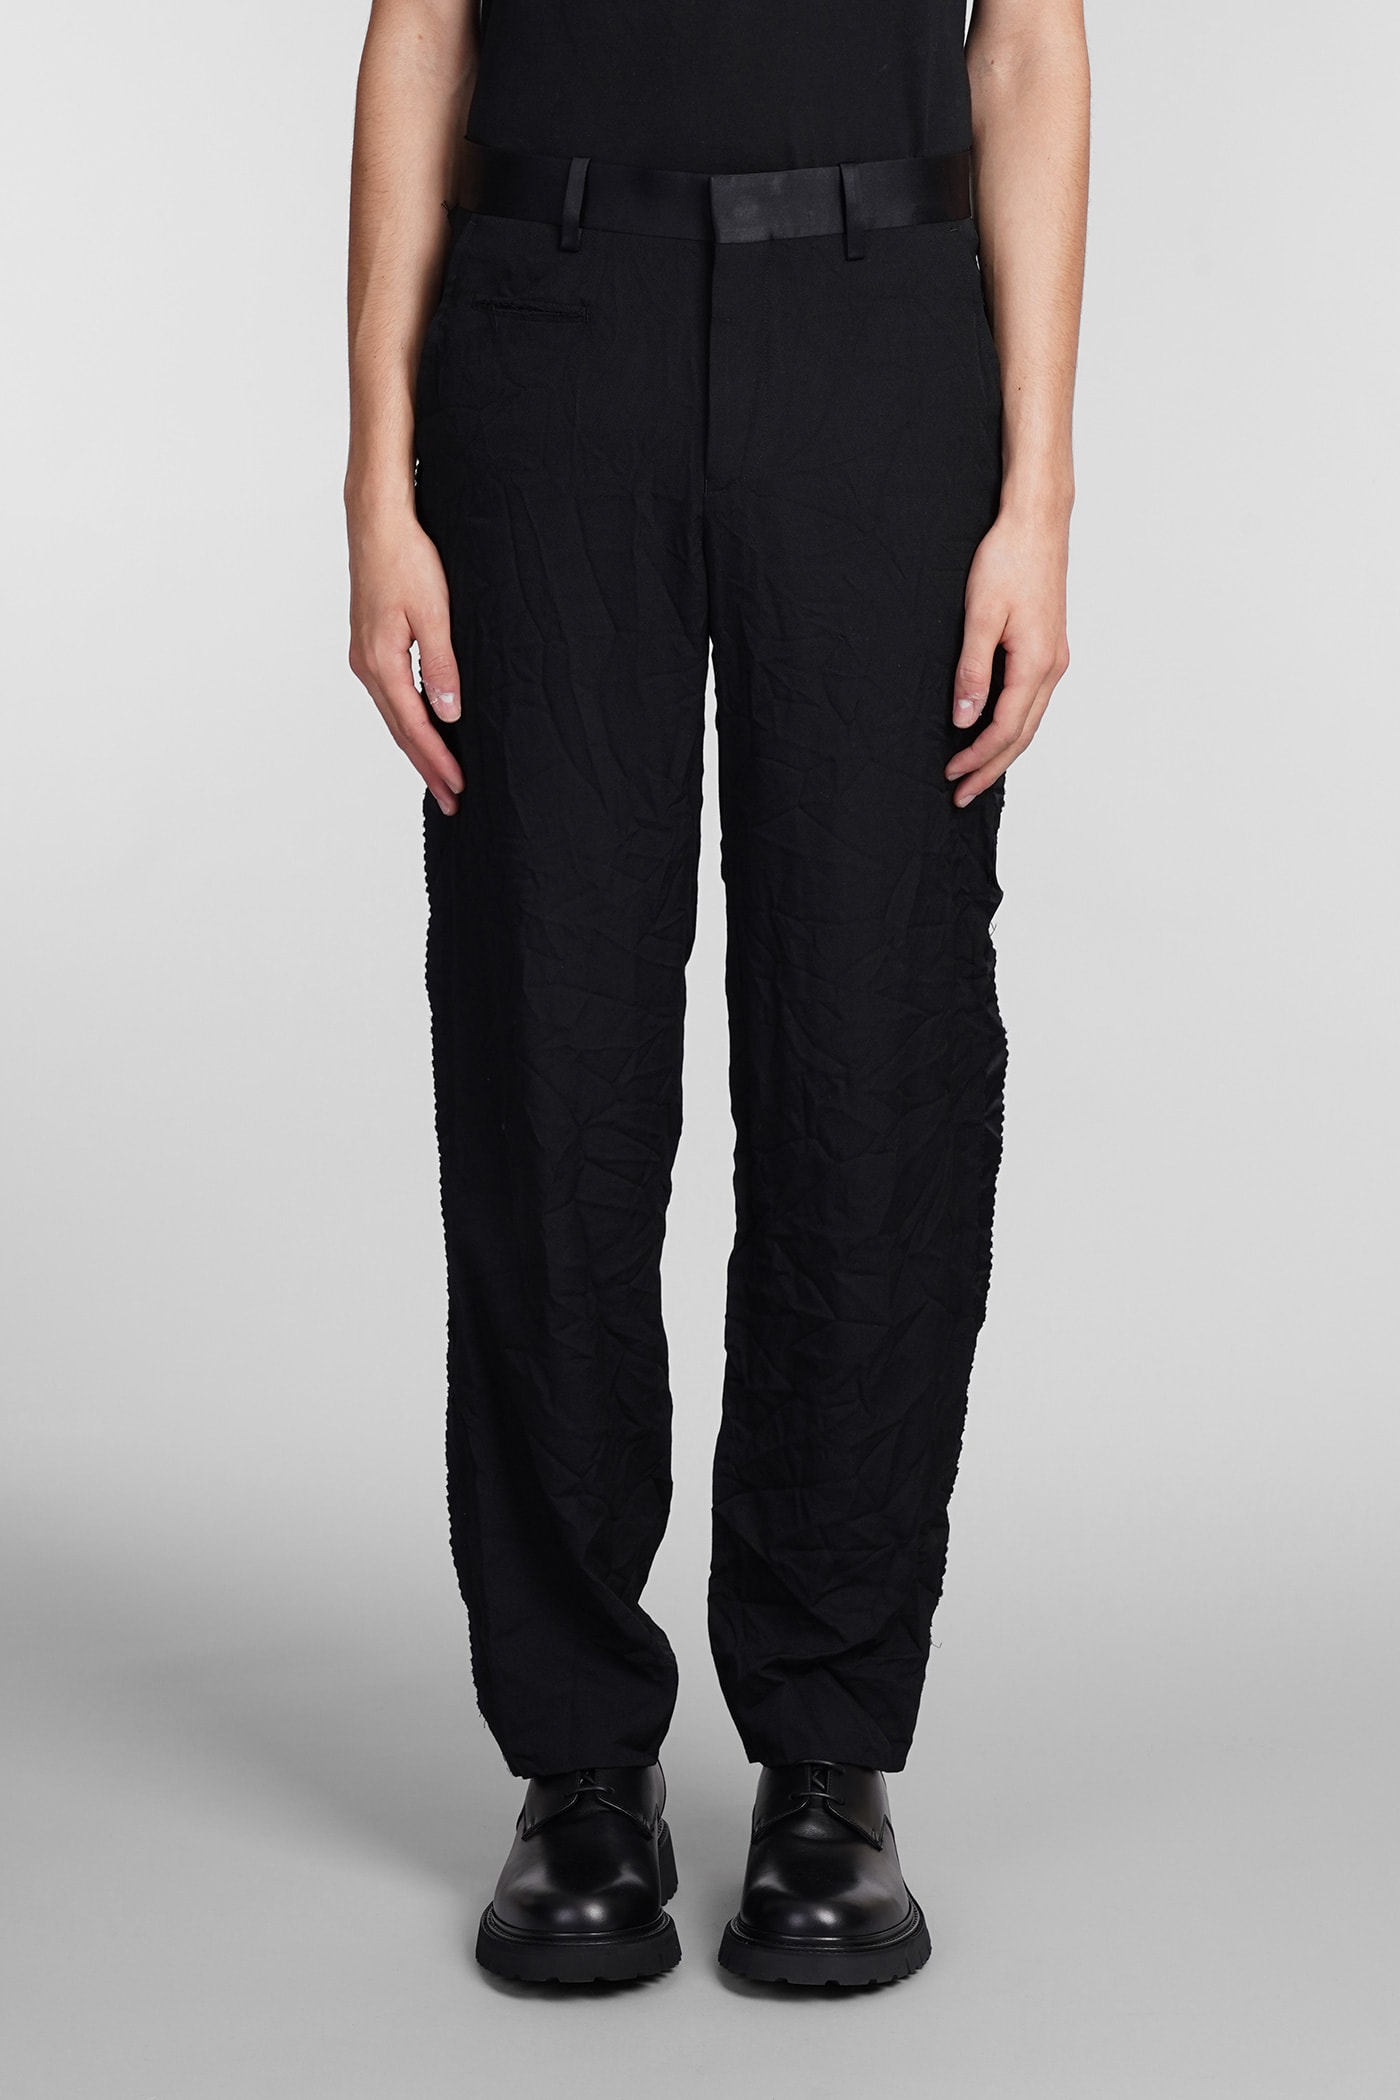 Undercover Trousers In Black Wool